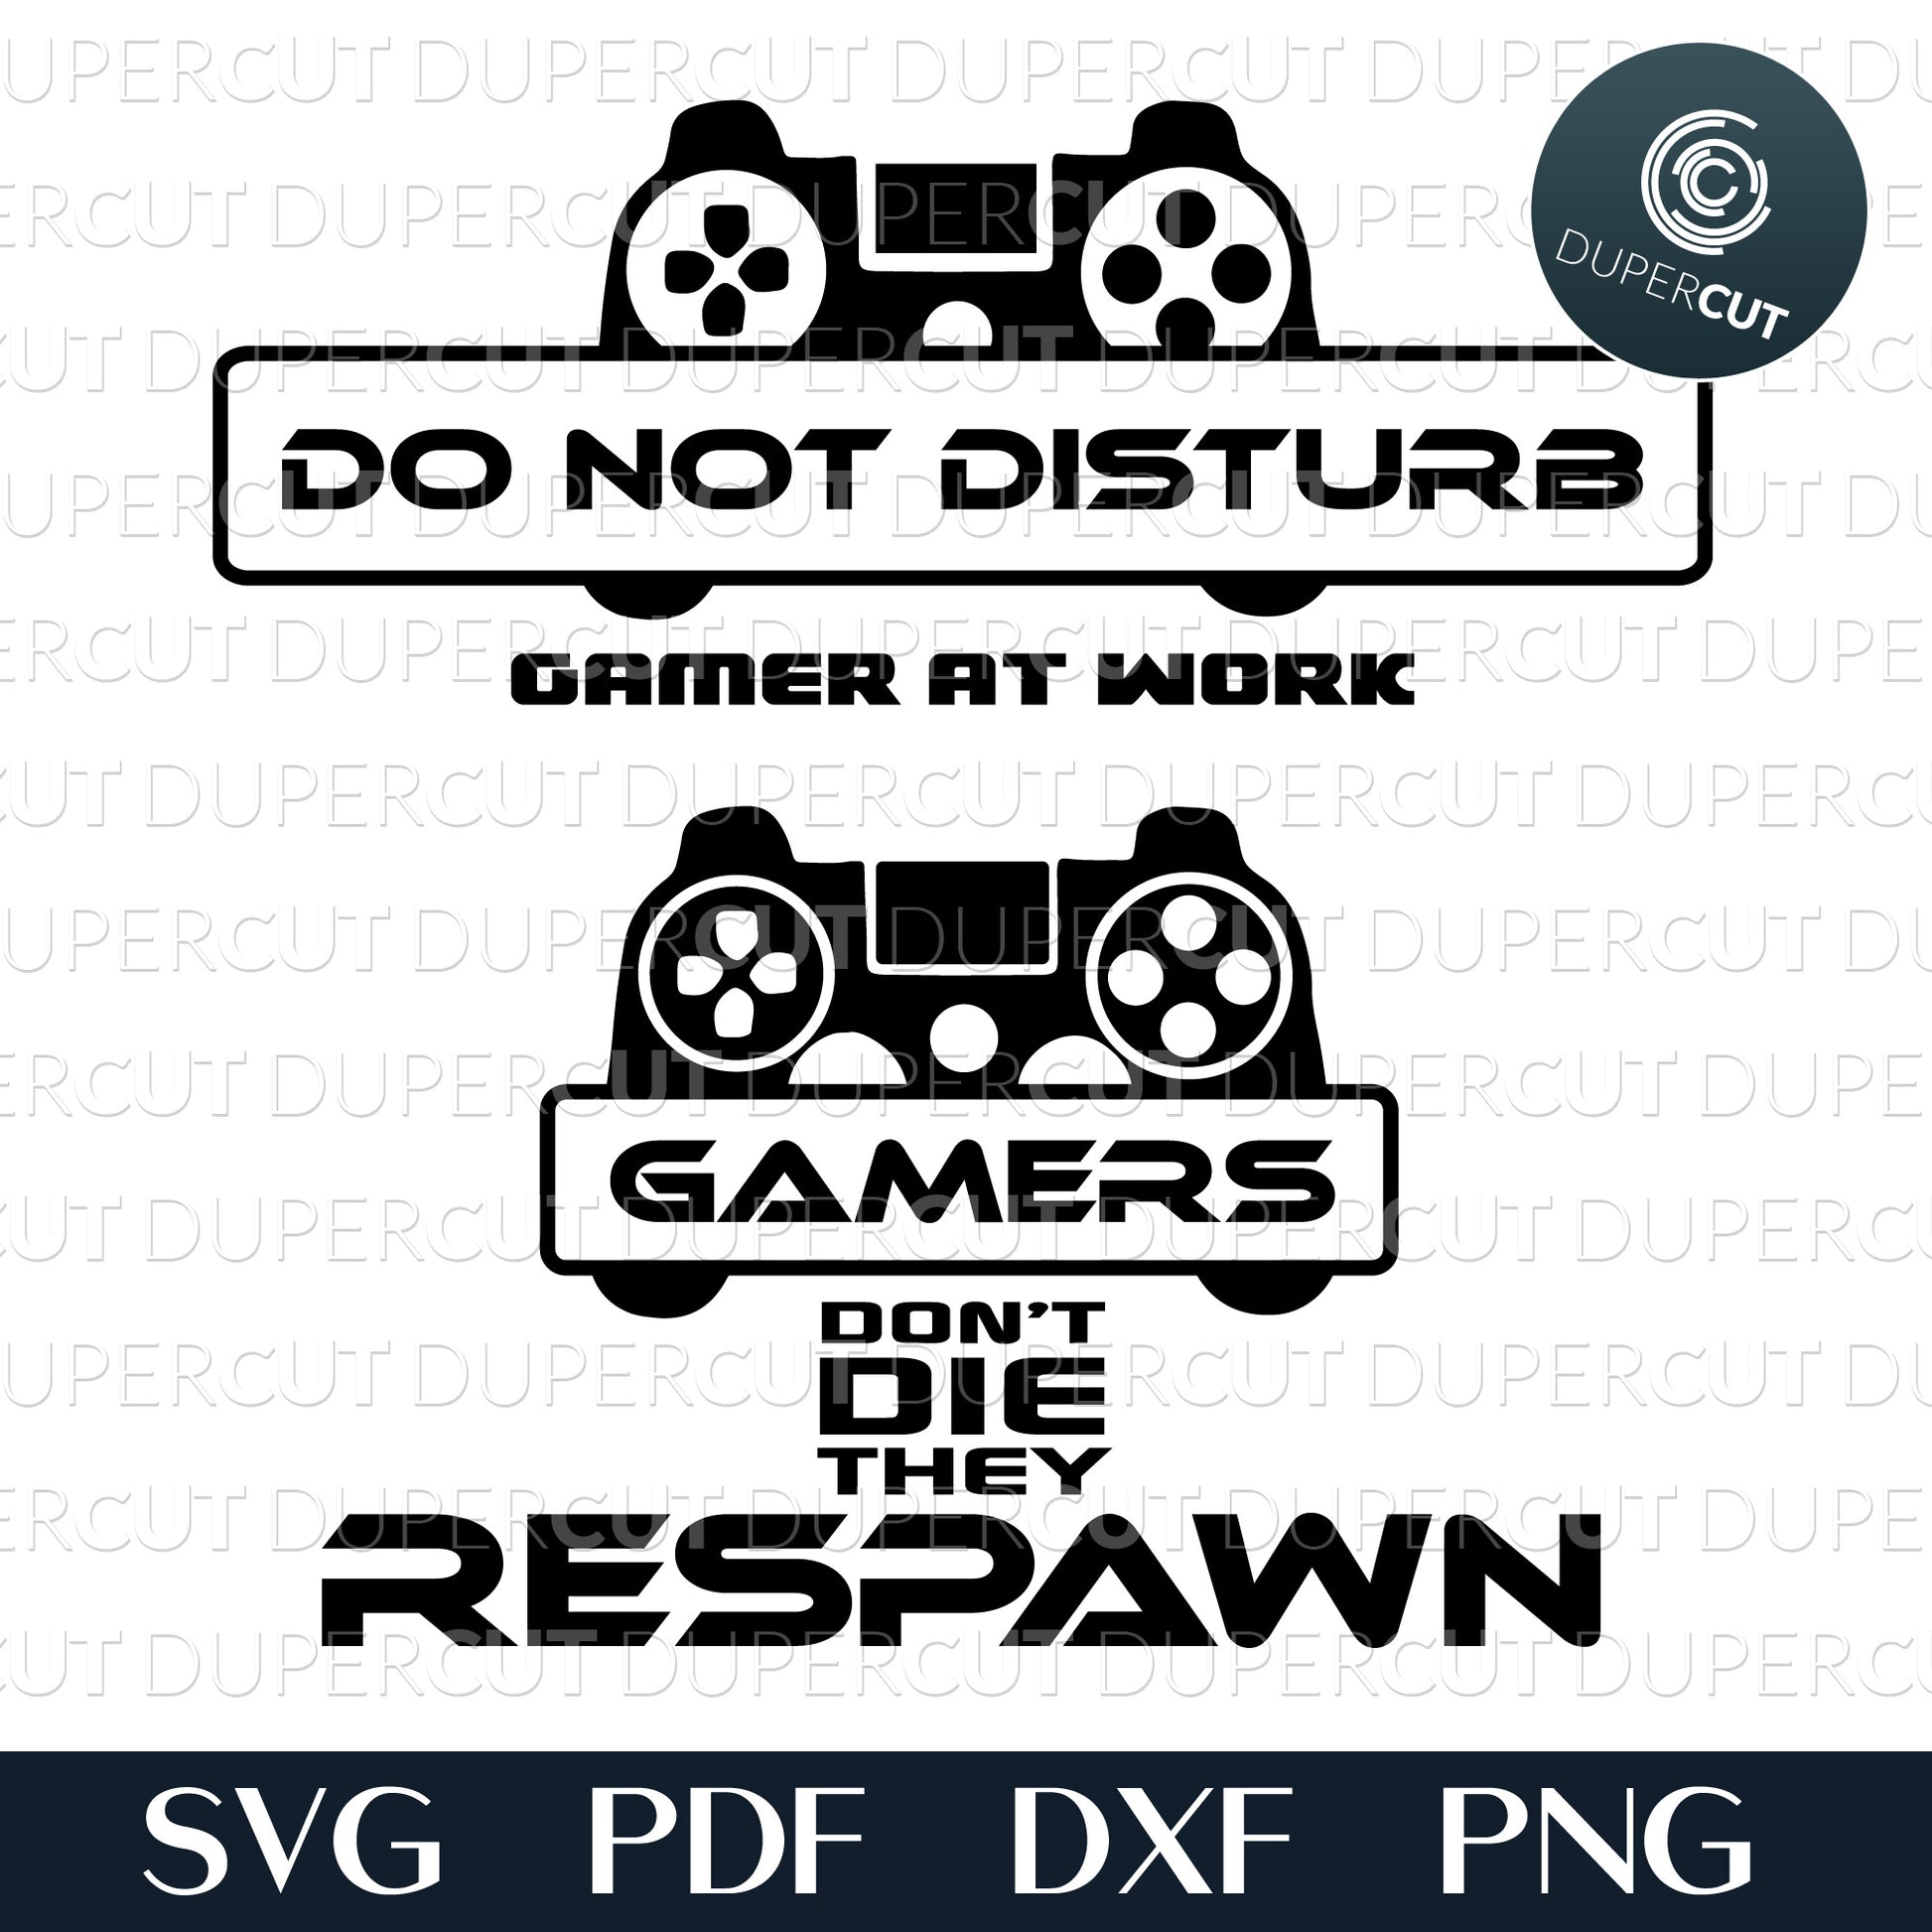 DIY gaming sign for kids room - SVG DXF JPEG files for CNC machines, laser cutting, Cricut, Silhouette Cameo, Glowforge engraving